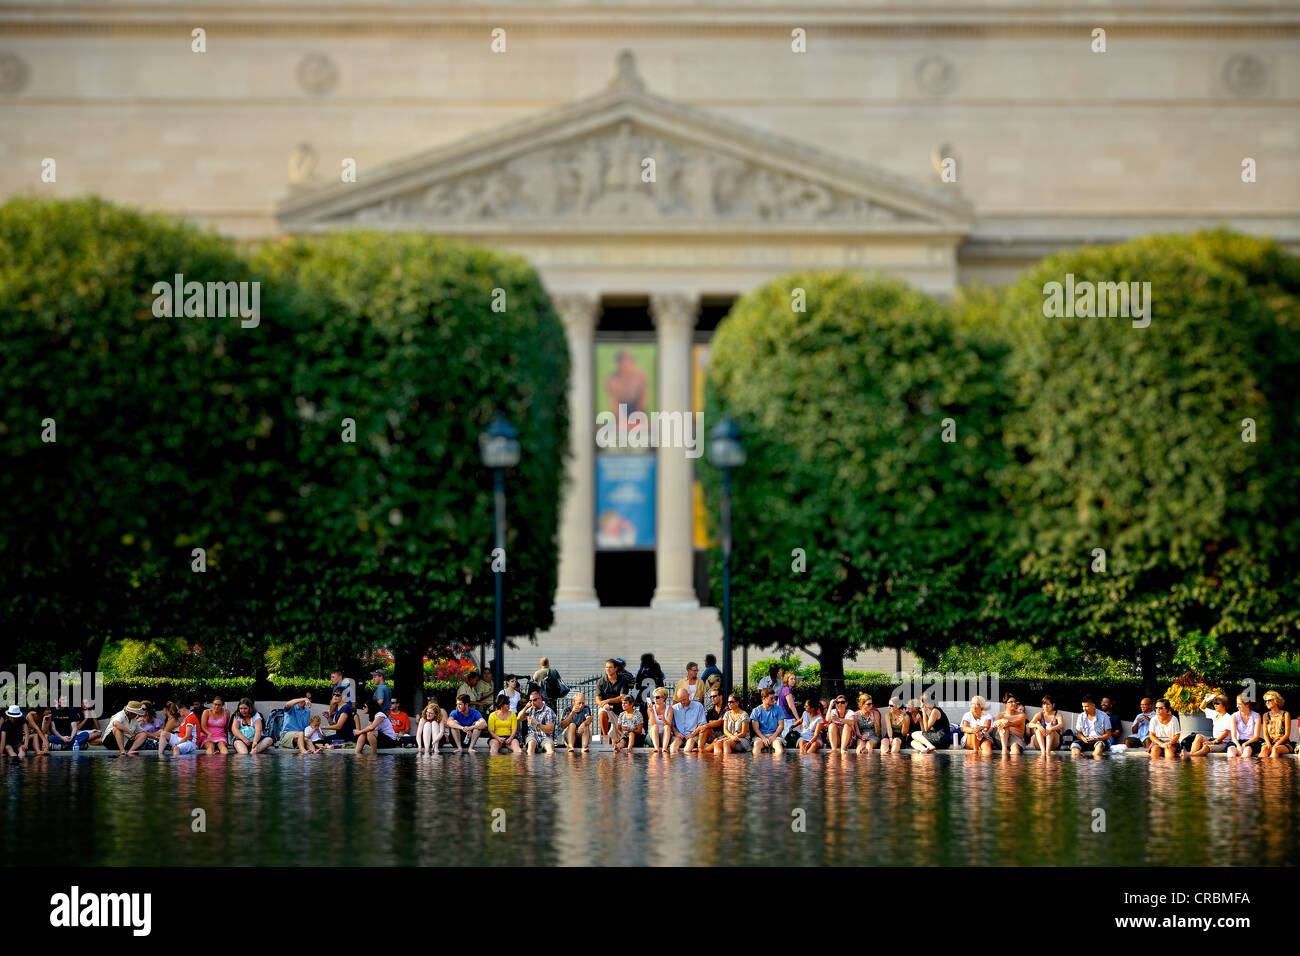 Miniature view, toy view, tilt-shift-effect, people relaxing at the lake of the National Gallery of Art Sculpture Garden Museum, Stock Photo